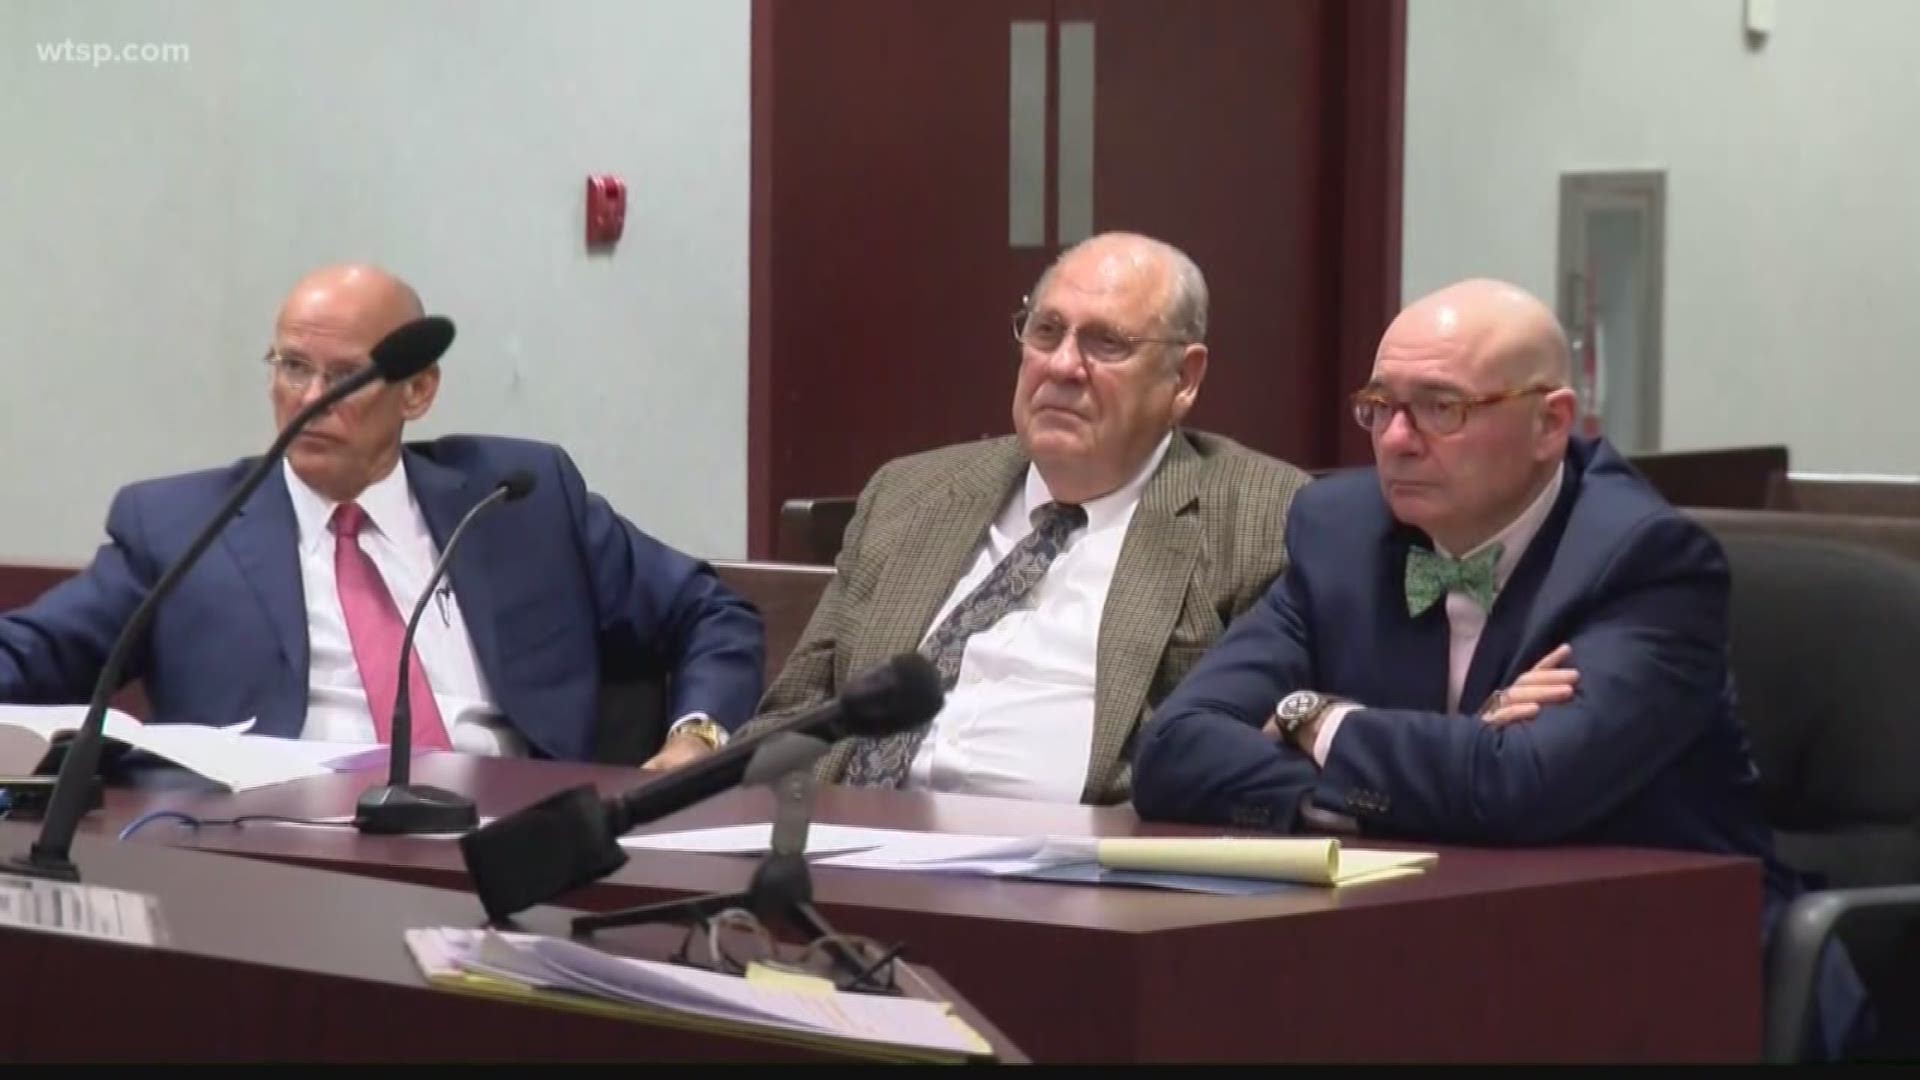 Curtis Reeves, the man of accused of shooting and killing a man inside a Pasco County movie theater, will be back in court Thursday.

Reeves, 76, is charged with murder in the January 2014 shooting death of Chad Oulson. His defense team unsuccessfully argued in August 2018 that the case should be dismissed based on Florida's "stand your ground" law.

Reeves has been free on $150,000 bail since July 2014 and his trial has been placed on hold indefinitely. He's been wearing a GPS ankle monitor and is required to stay at his Hernando County home except for court hearings, visits to his lawyer's office, doctor's appointments and trips to the grocery store.

Reeves is now asking a judge to allow him to move freely through Hillsborough, Pasco and Hernando counties. The former Tampa police captain also petitioned the court to let him remove his ankle monitor.

His attorneys filed the motion, to be discussed in court today, because they say he isn't a "flight risk" or a danger to the community.

Reeves has also asked the court to authorize the transfer of possession and control of his firearms to his son, a law enforcement officer. Reeves said he's currently paying a monthly service fee to store the weapons, which has totaled nearly $5,000.